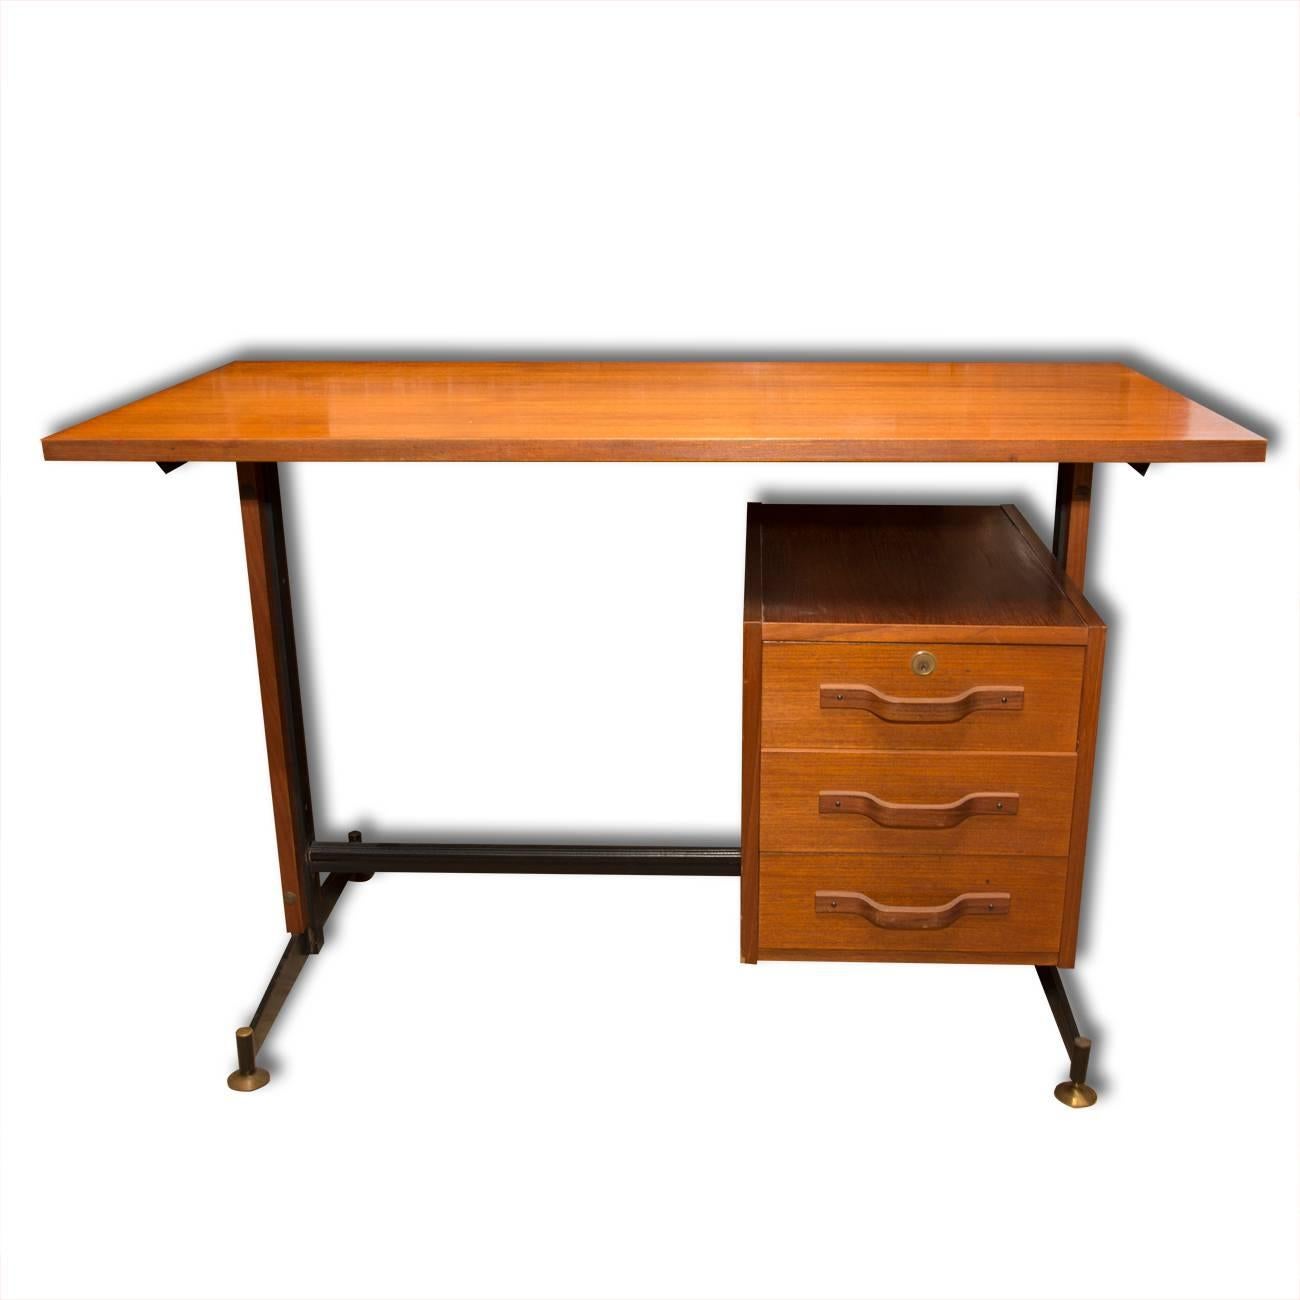 Mid-century Italian teak writing desk with chair made in the 1950s. The writing desk is in the style of Osvaldo Borsani’s for Tecno. Both pieces have been very well-preserved. The table features an iron structure with brass ends and the chair